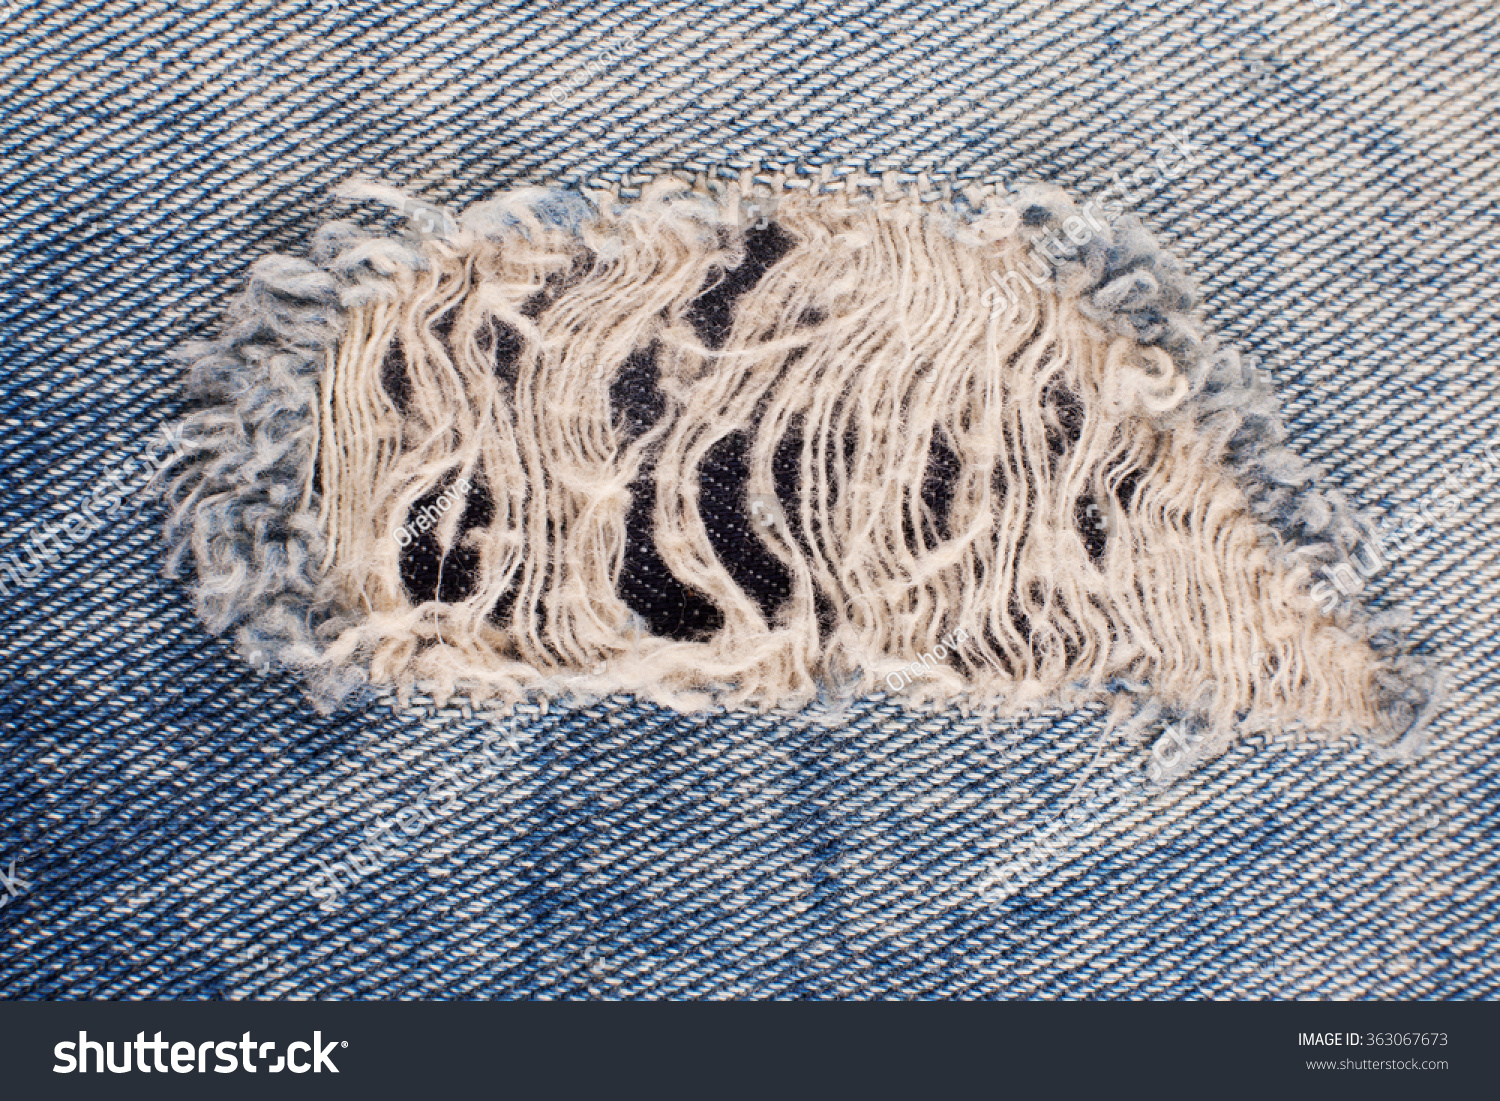 Denim Texture. A Fragment Of Blue Jeans. Holey Jeans. Ripped Jeans, A ...